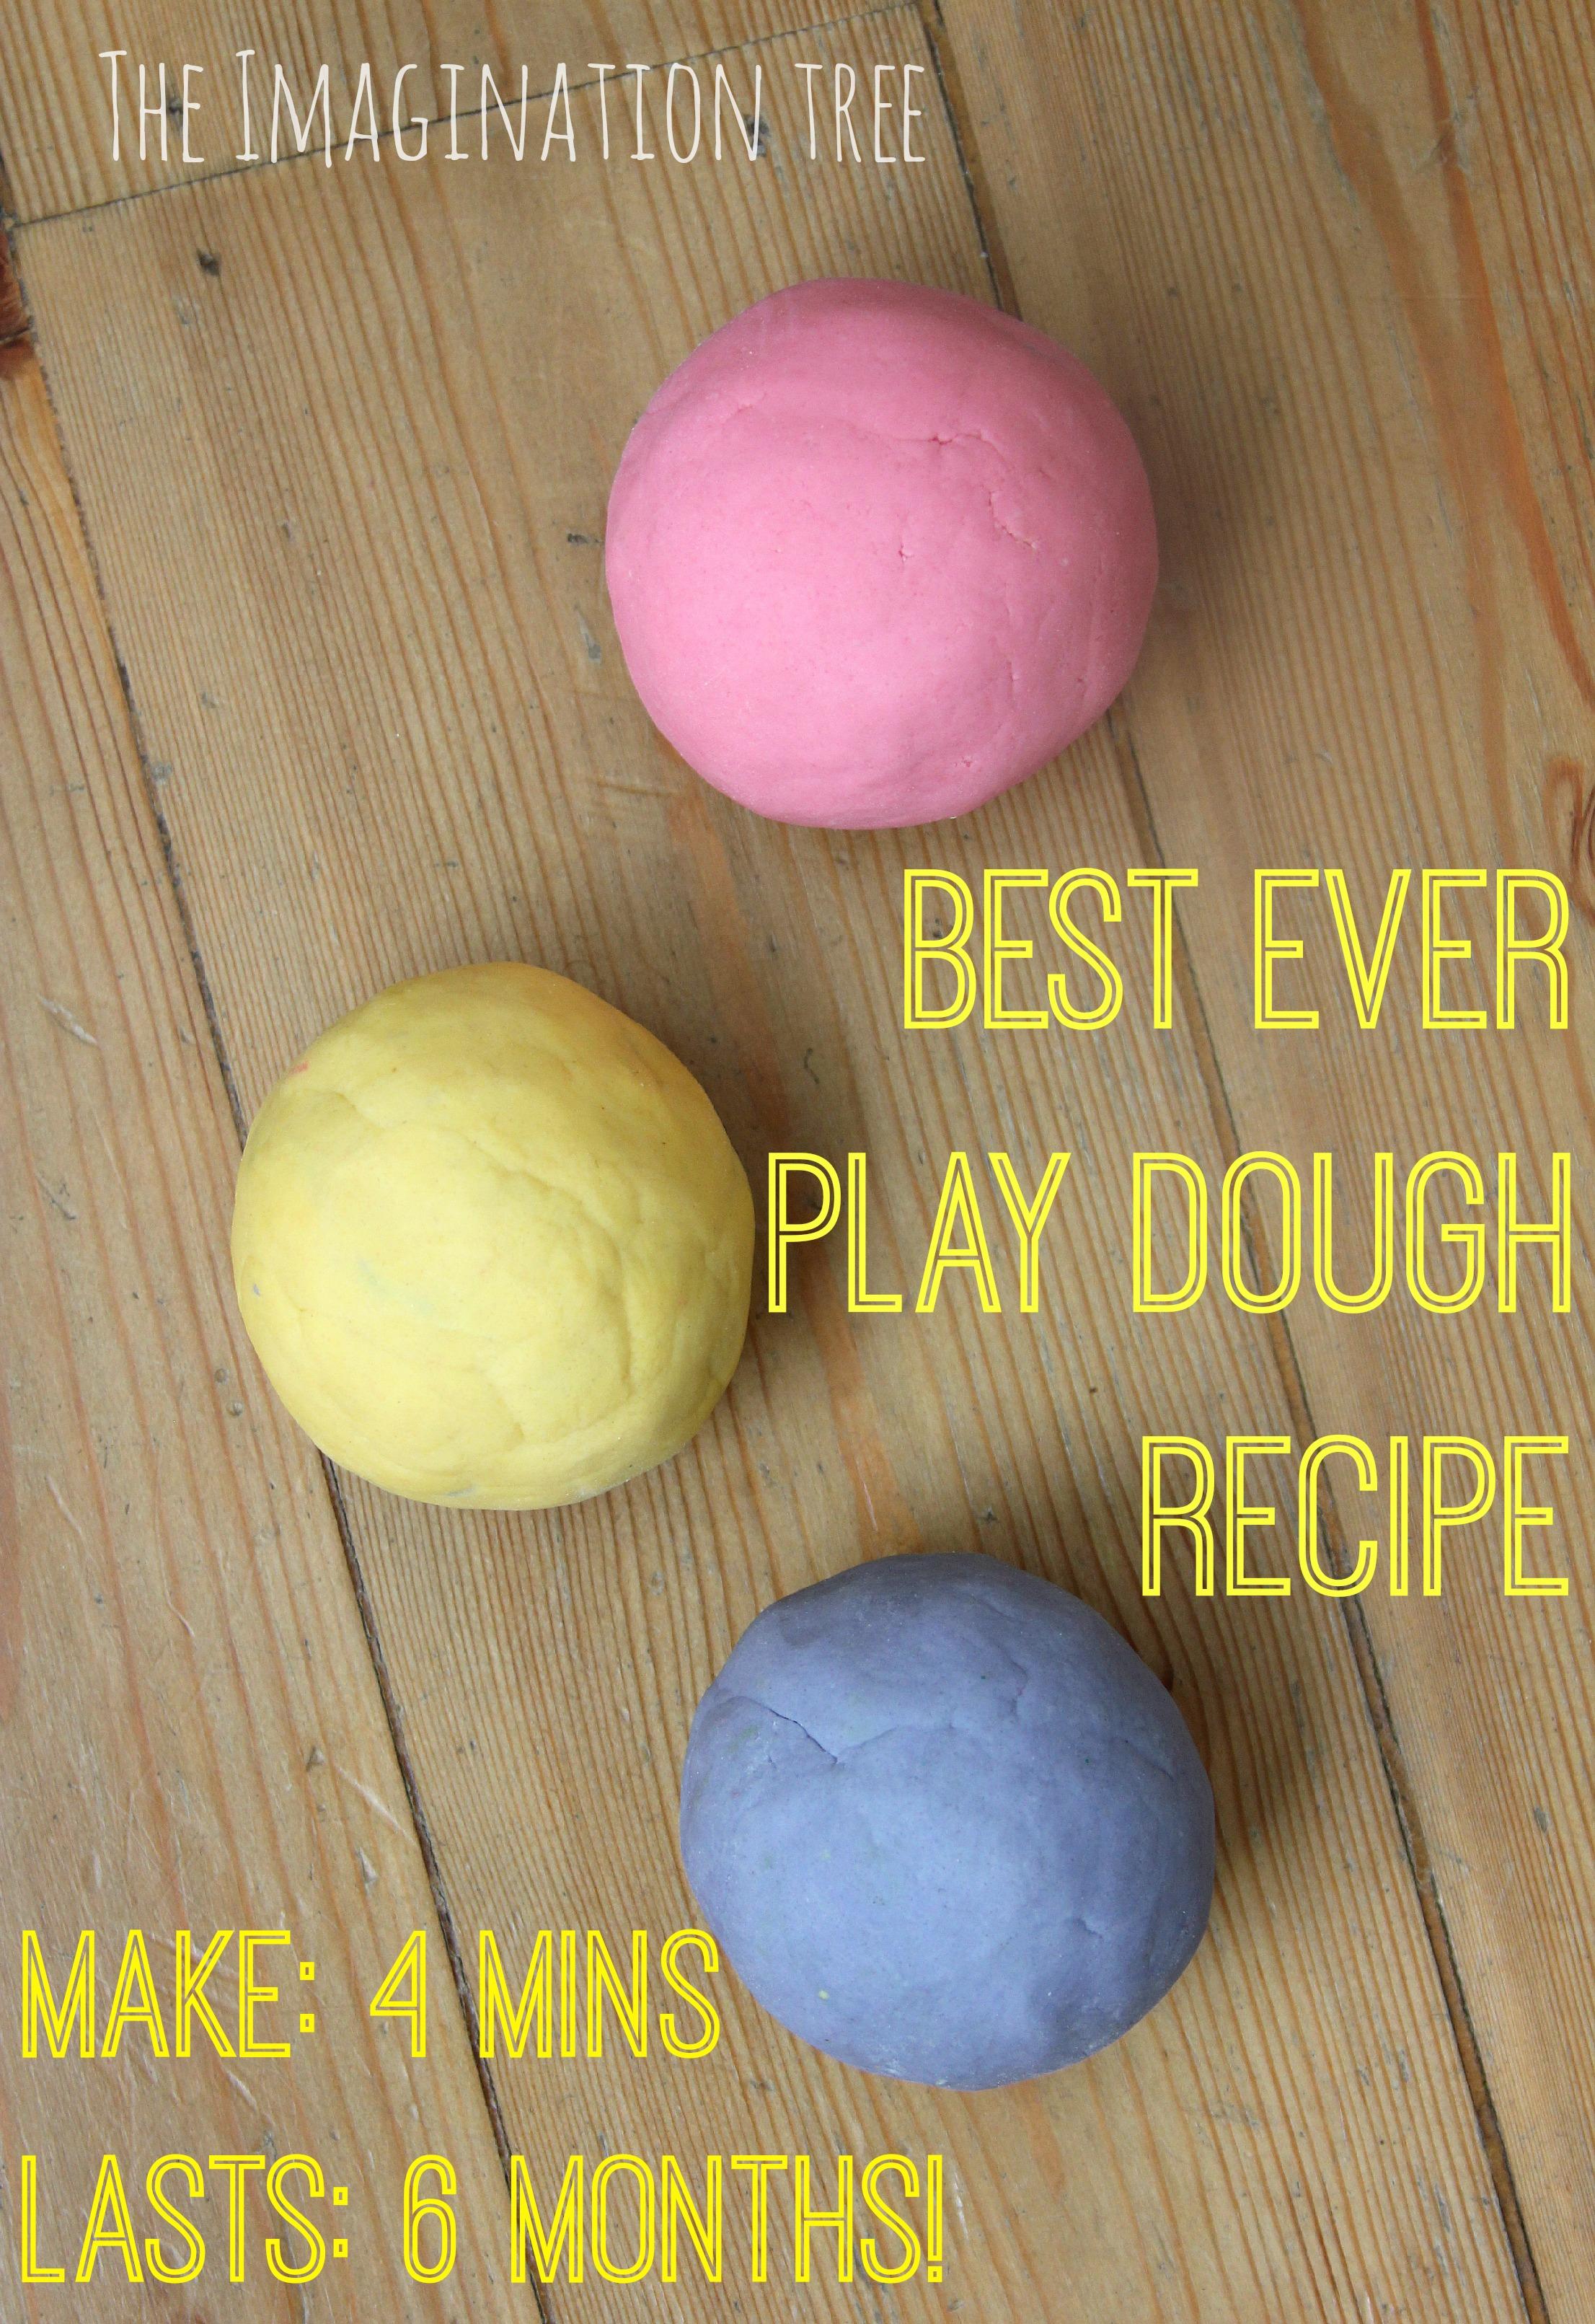 Best ever no-cook play dough recipe- The Imagination Tree